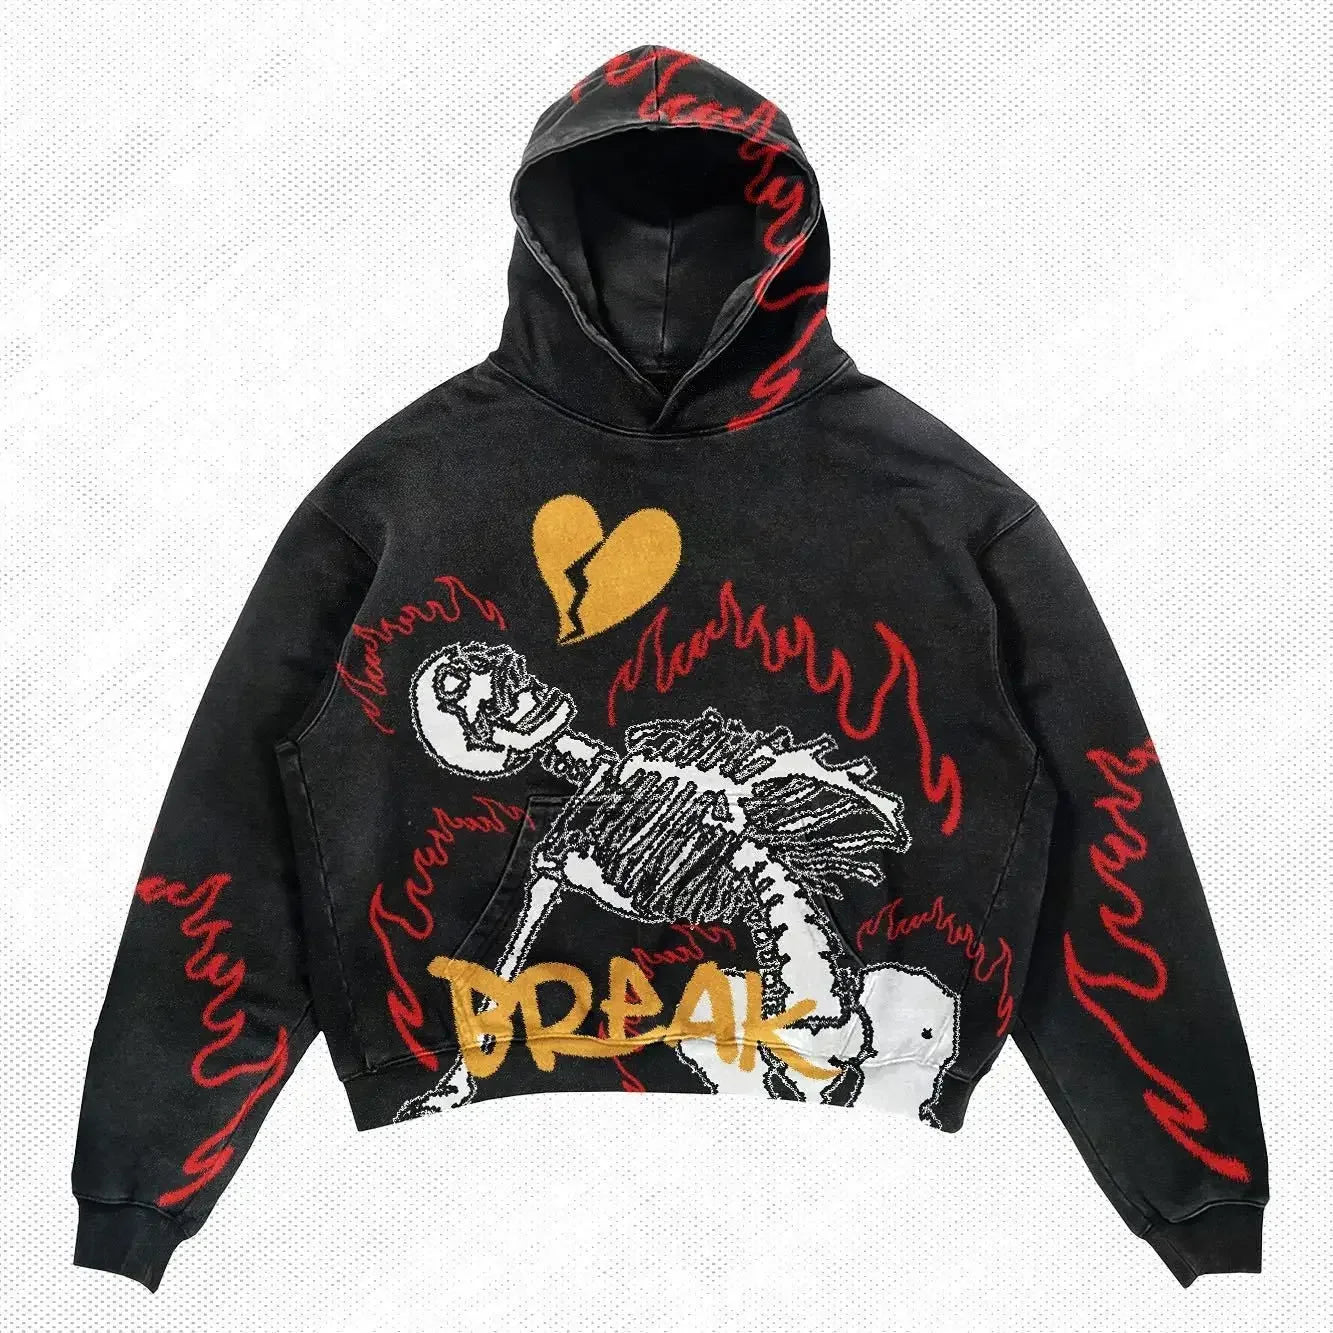 A Maramalive™ Explosions Printed Skull Y2K Retro Hooded Sweater Coat Street Style Gothic Casual Fashion Hooded Sweater Men's Female with red flame patterns, a skeleton graphic on the front, a broken heart above it, and the word "BREAK" in yellow below—perfect for those into punk style and men's fashion.